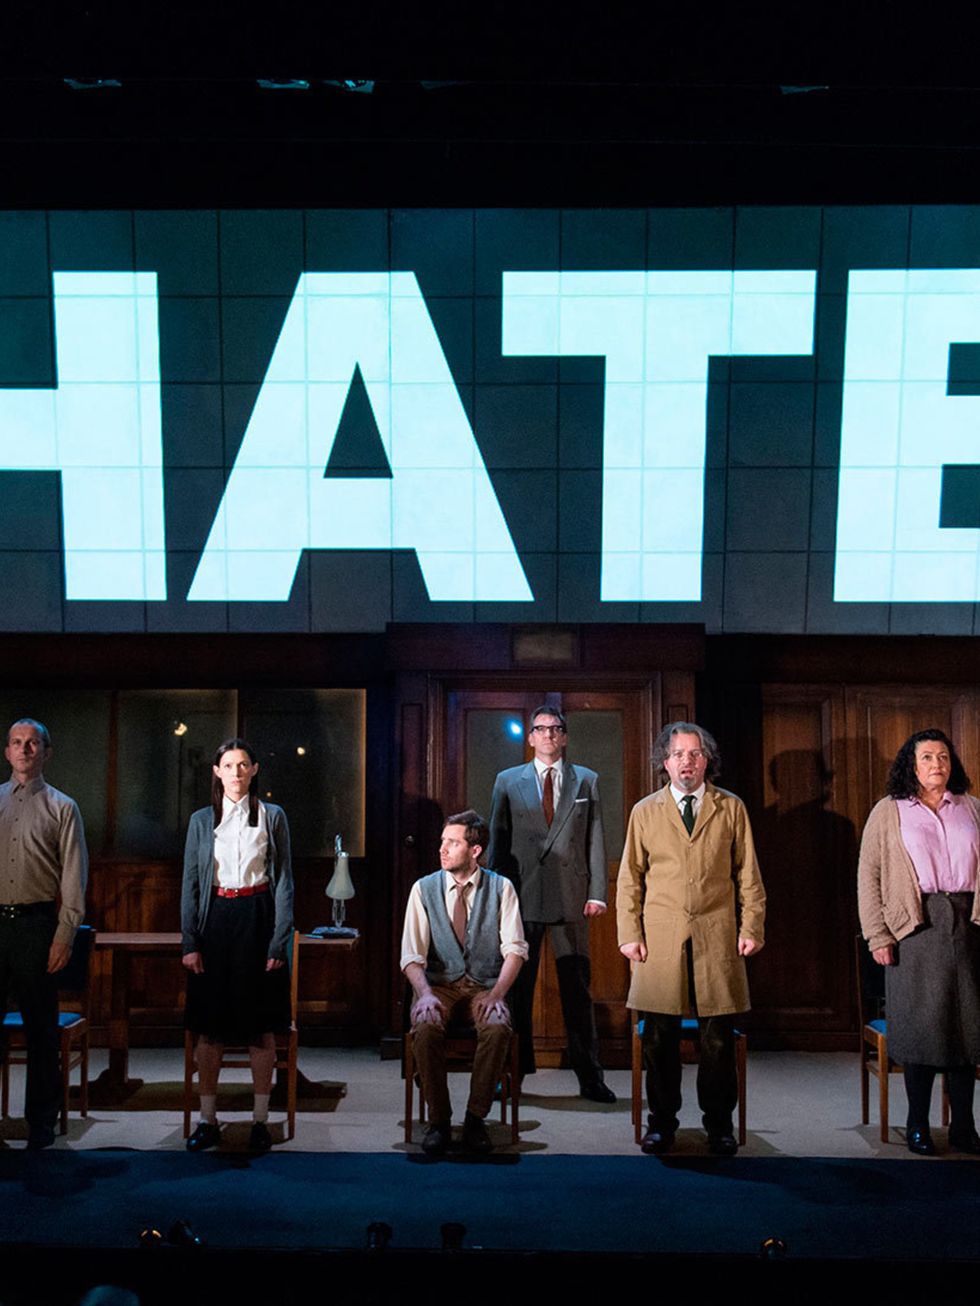 &lt;p&gt;THEATRE: 1984 &lt;/p&gt;&lt;p&gt;Dizzying and visceral, Robert Icke and Duncan Macmillan&rsquo;s stage adaptation of George Orwell&rsquo;s game-changing novel &ndash; now at the Playhouse following a sell-out run at the Almedia &ndash; is a raw a